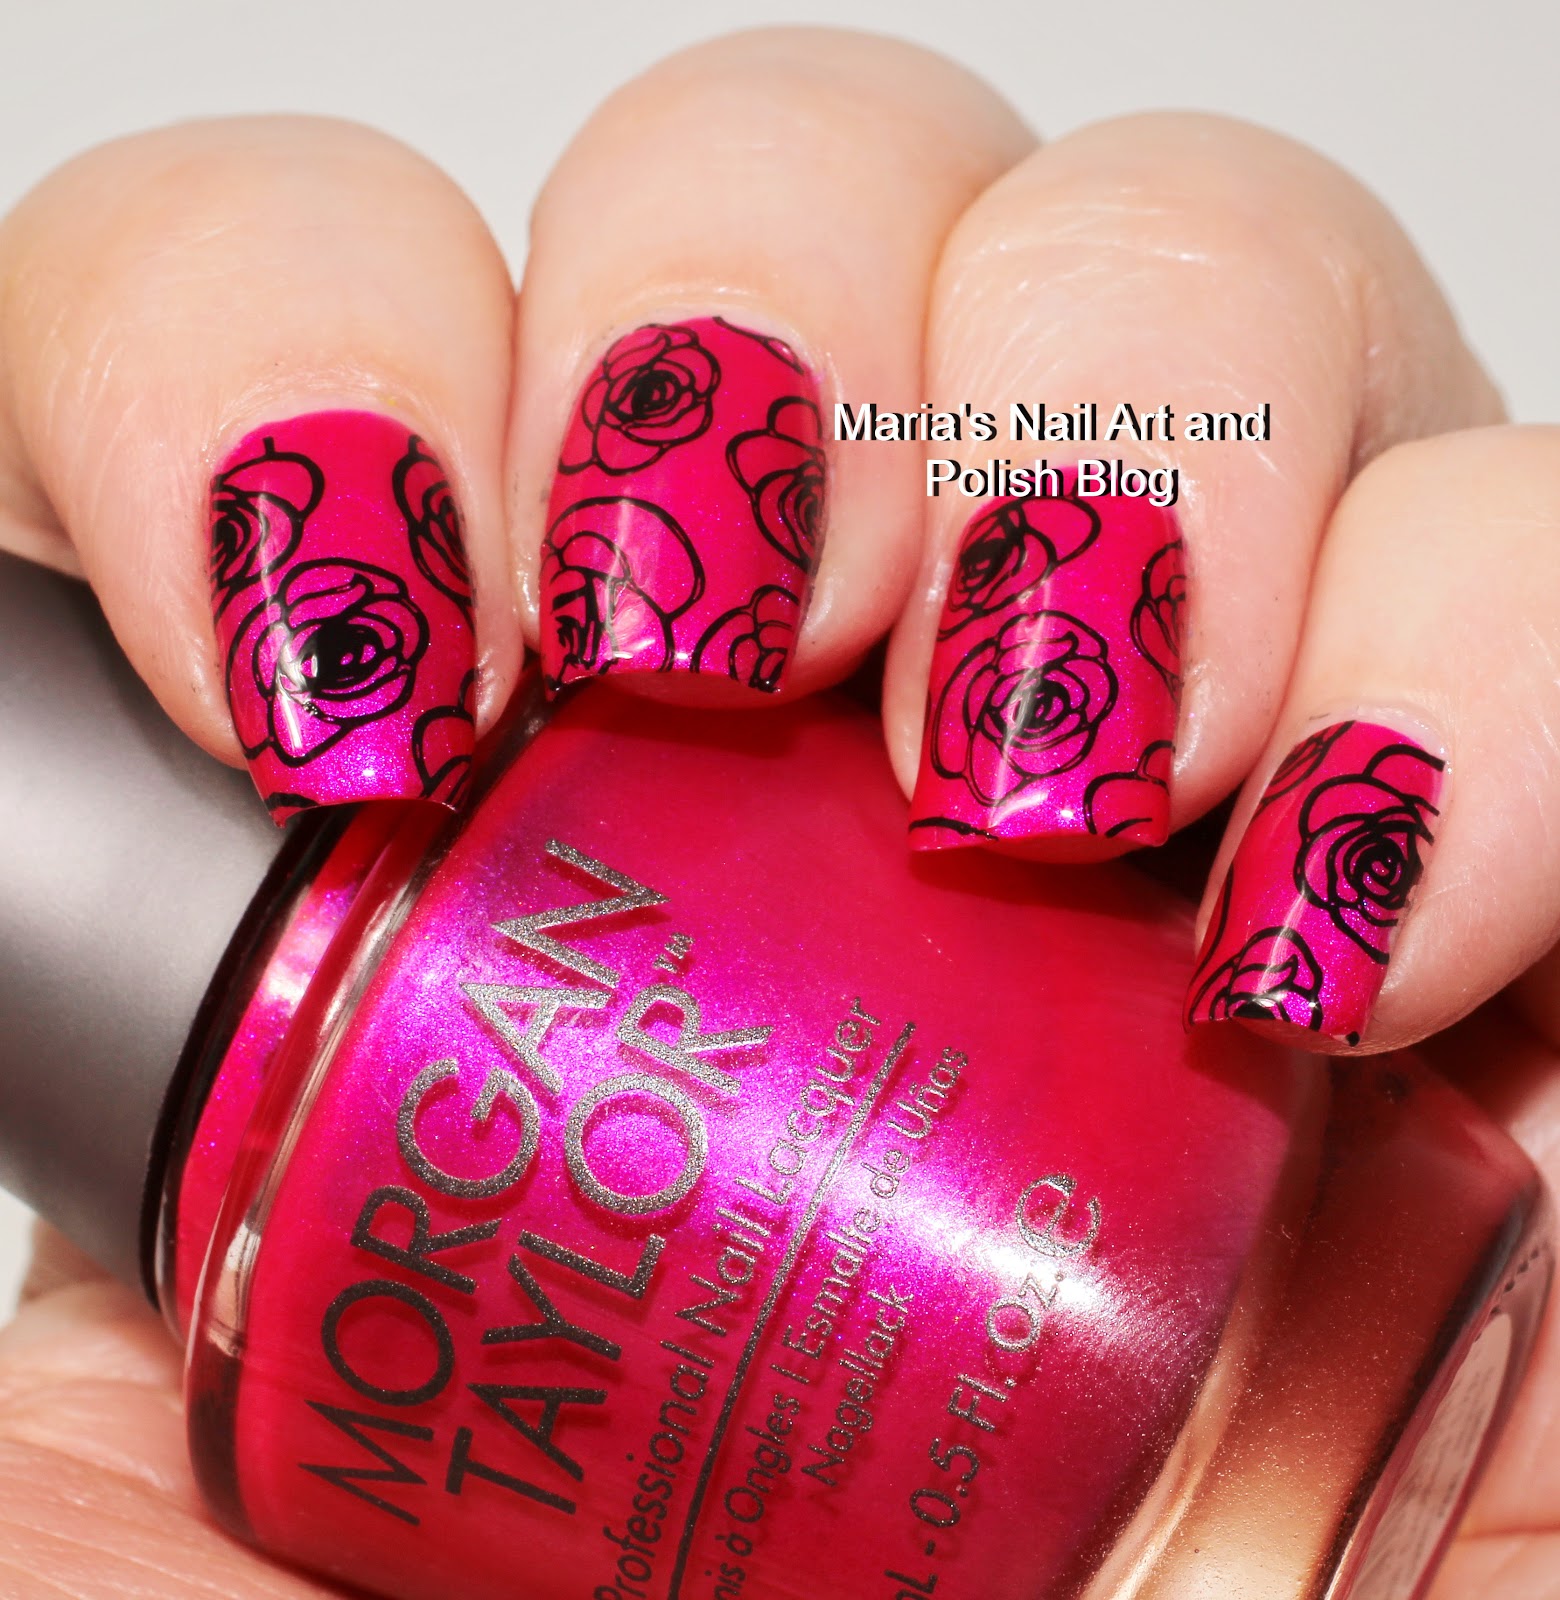 hypotese vene Besiddelse Marias Nail Art and Polish Blog: Born Pretty Store stamping plate review